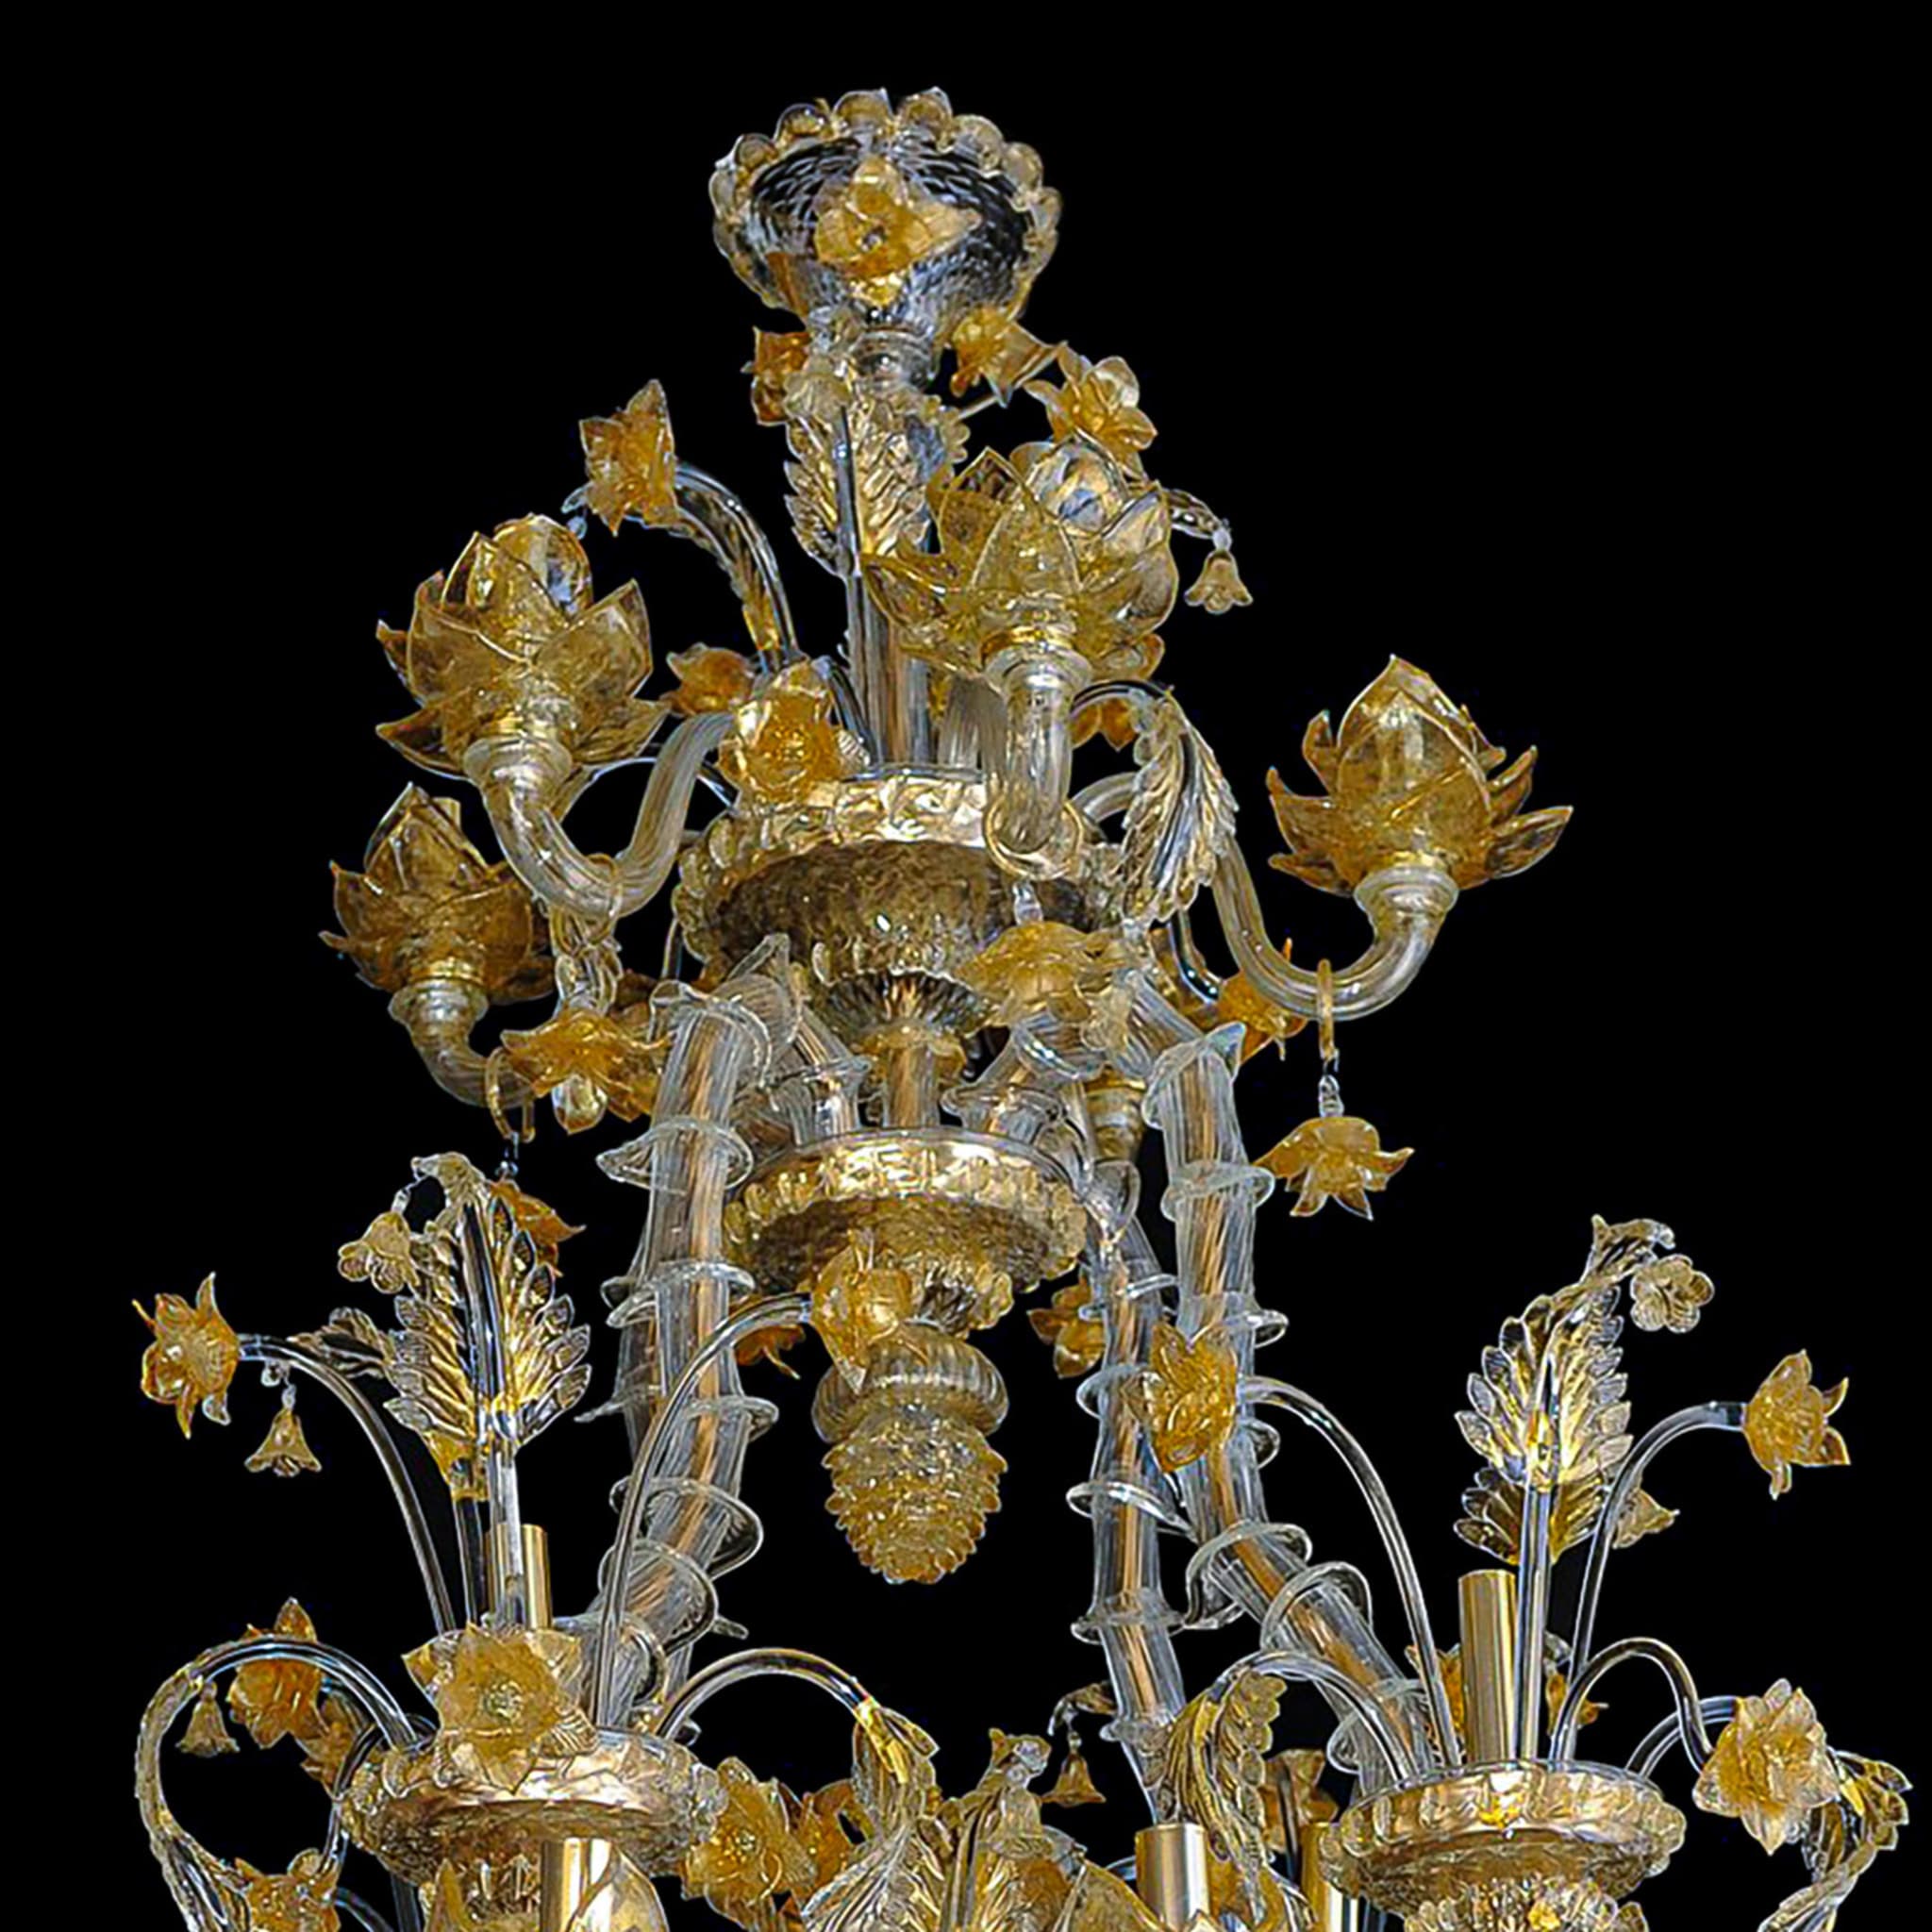 Rezzonico-style Gold and Crystal Chandelier #4 - Alternative view 2